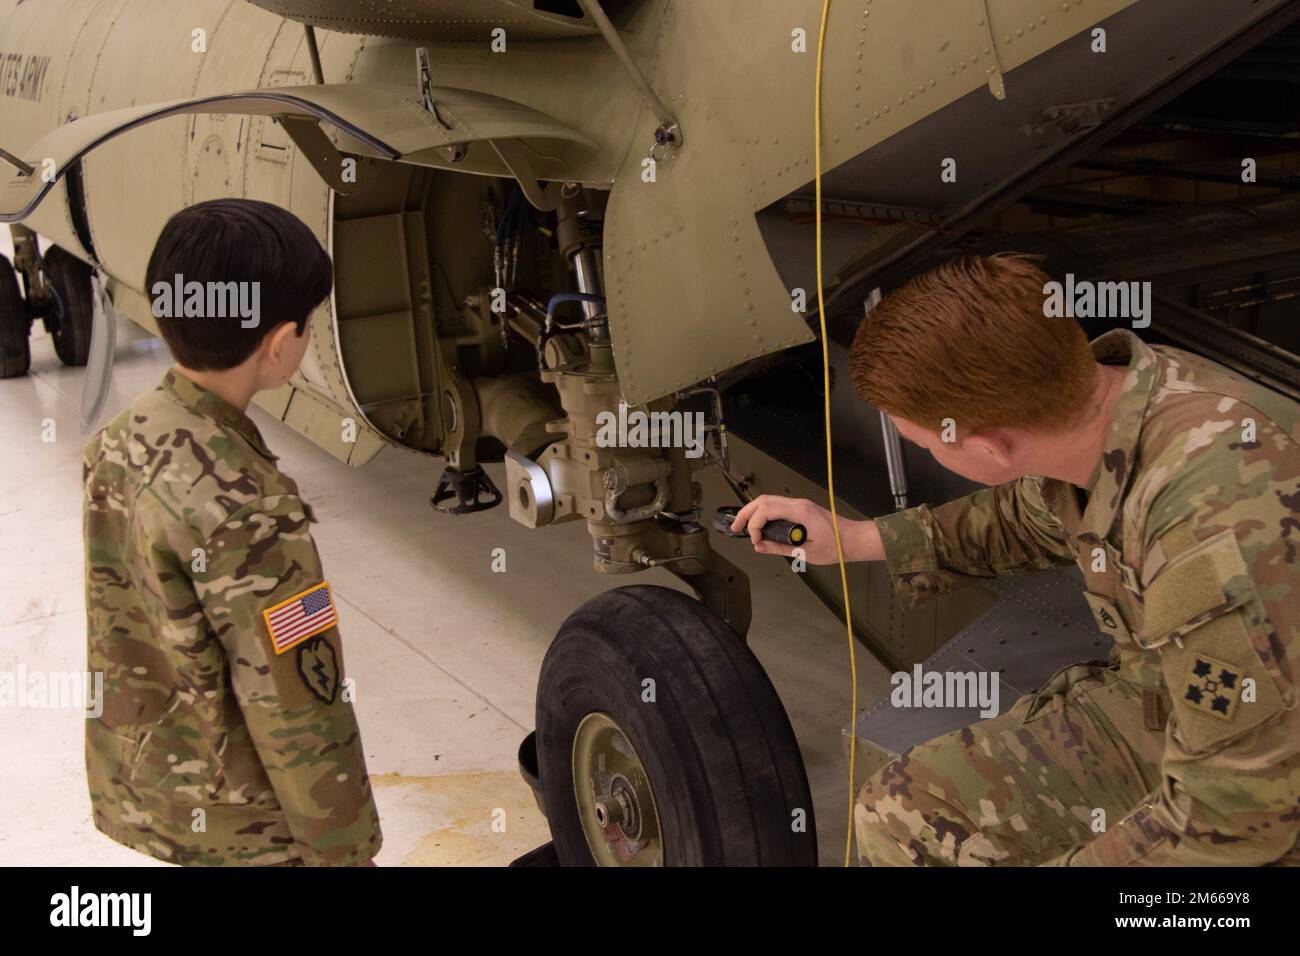 Staff Sgt. James Harty, a CH-47 Chinook helicopter repairer assigned to 404th Aviation Support Battalion, 4th Combat Aviation Brigade, 4th Infantry Division, shows Aiden Stefanik, a military child who loves chinooks, how to inspect repairs on the helicopter April 6, 2022, at Fort Carson, Colorado. During the Month of the Military Child, the Army aims to support our military children and show our appreciation for the sacrifices they make by showing the kids an up-close view of what their parents do. Stock Photo